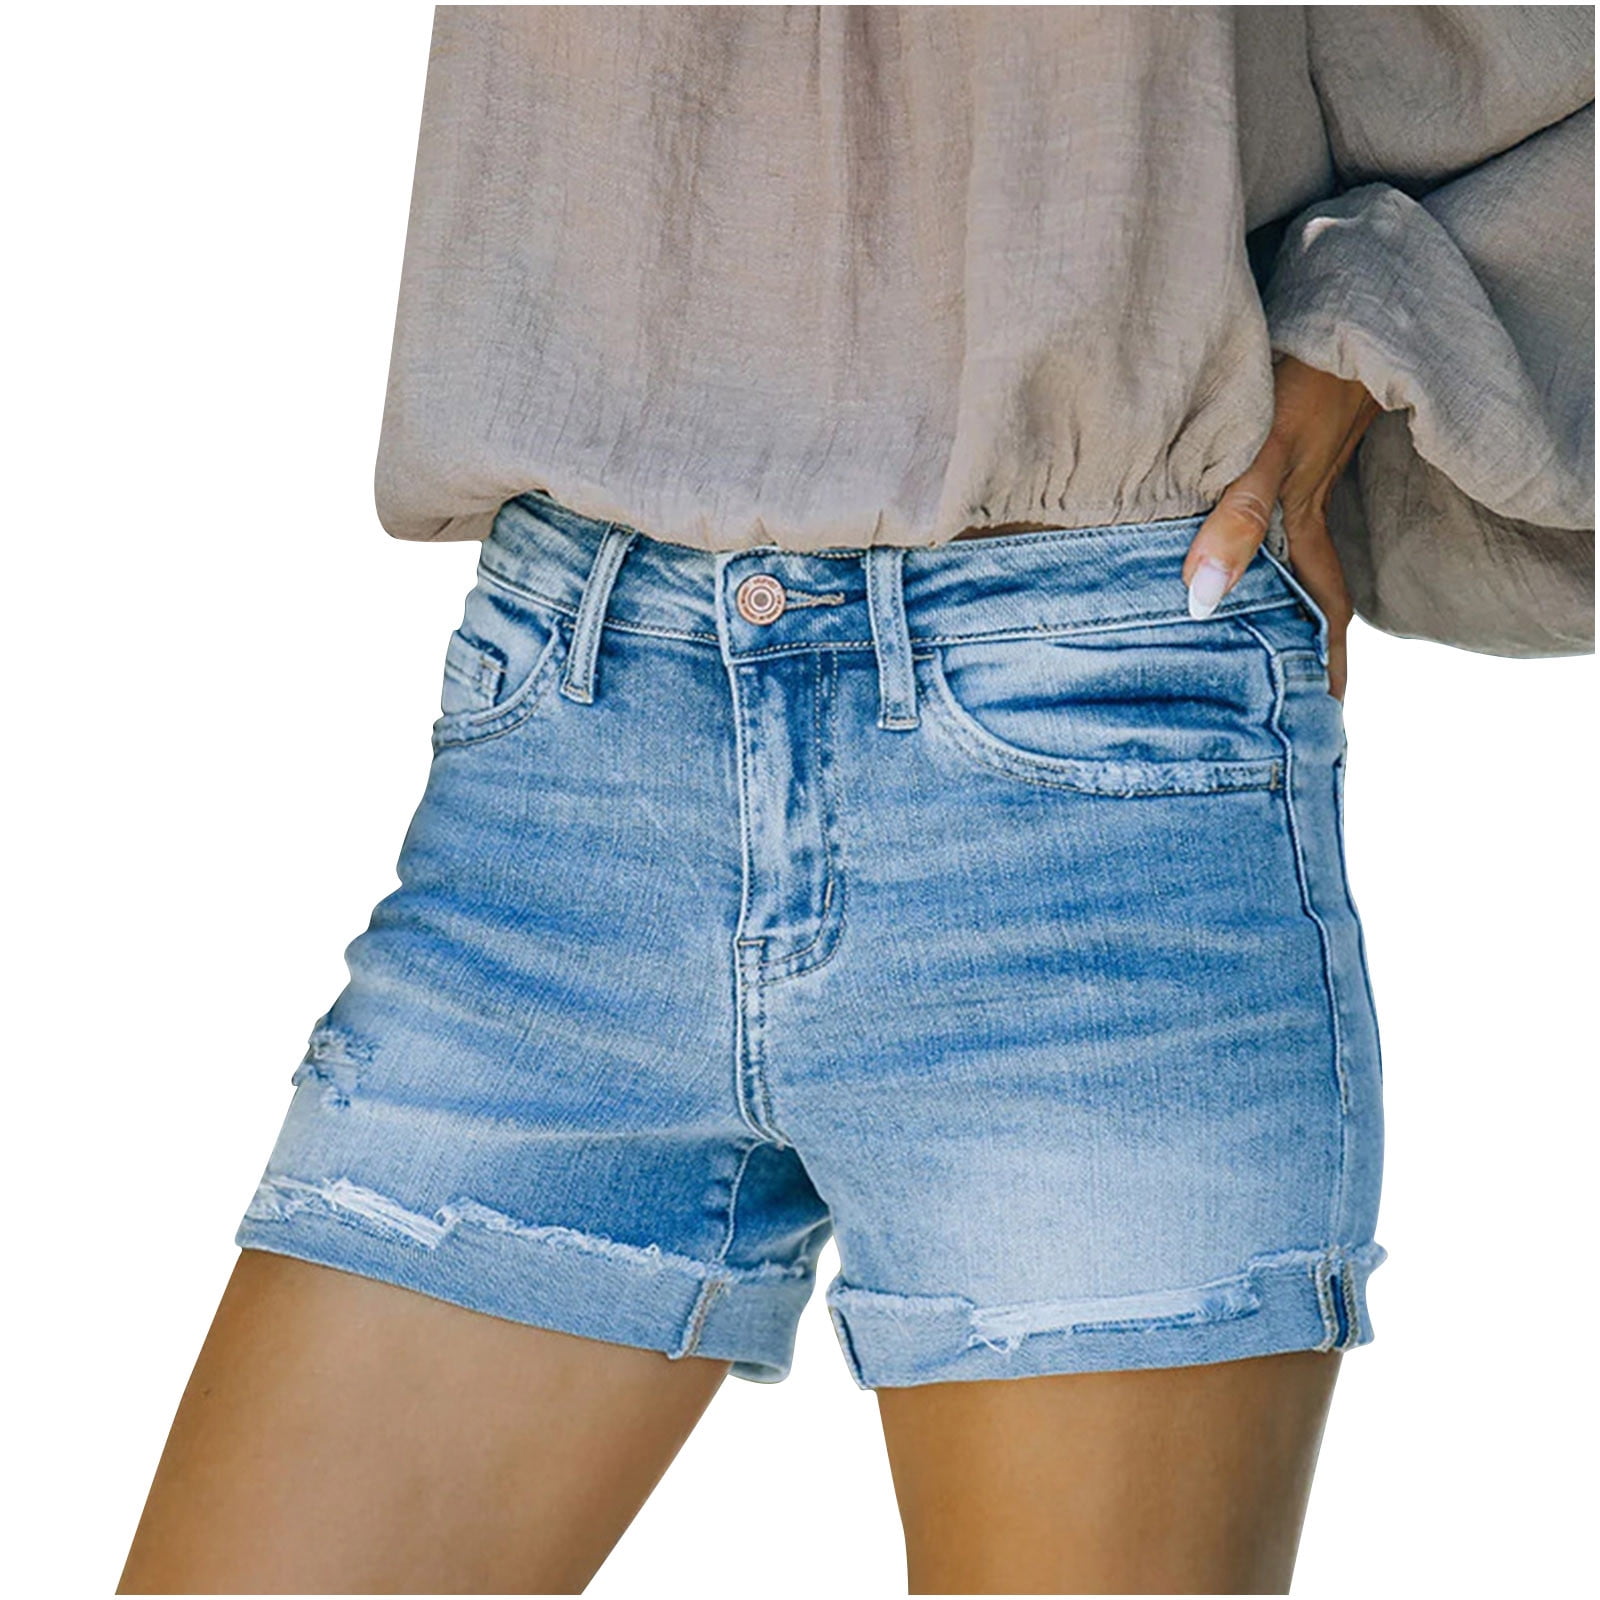 YYDGH Women's Denim Shorts Casual Mid Waist Ripped Jean Shorts Frayed Raw  Hem Distressed Stretchy Short Jeans Sky Blue XL